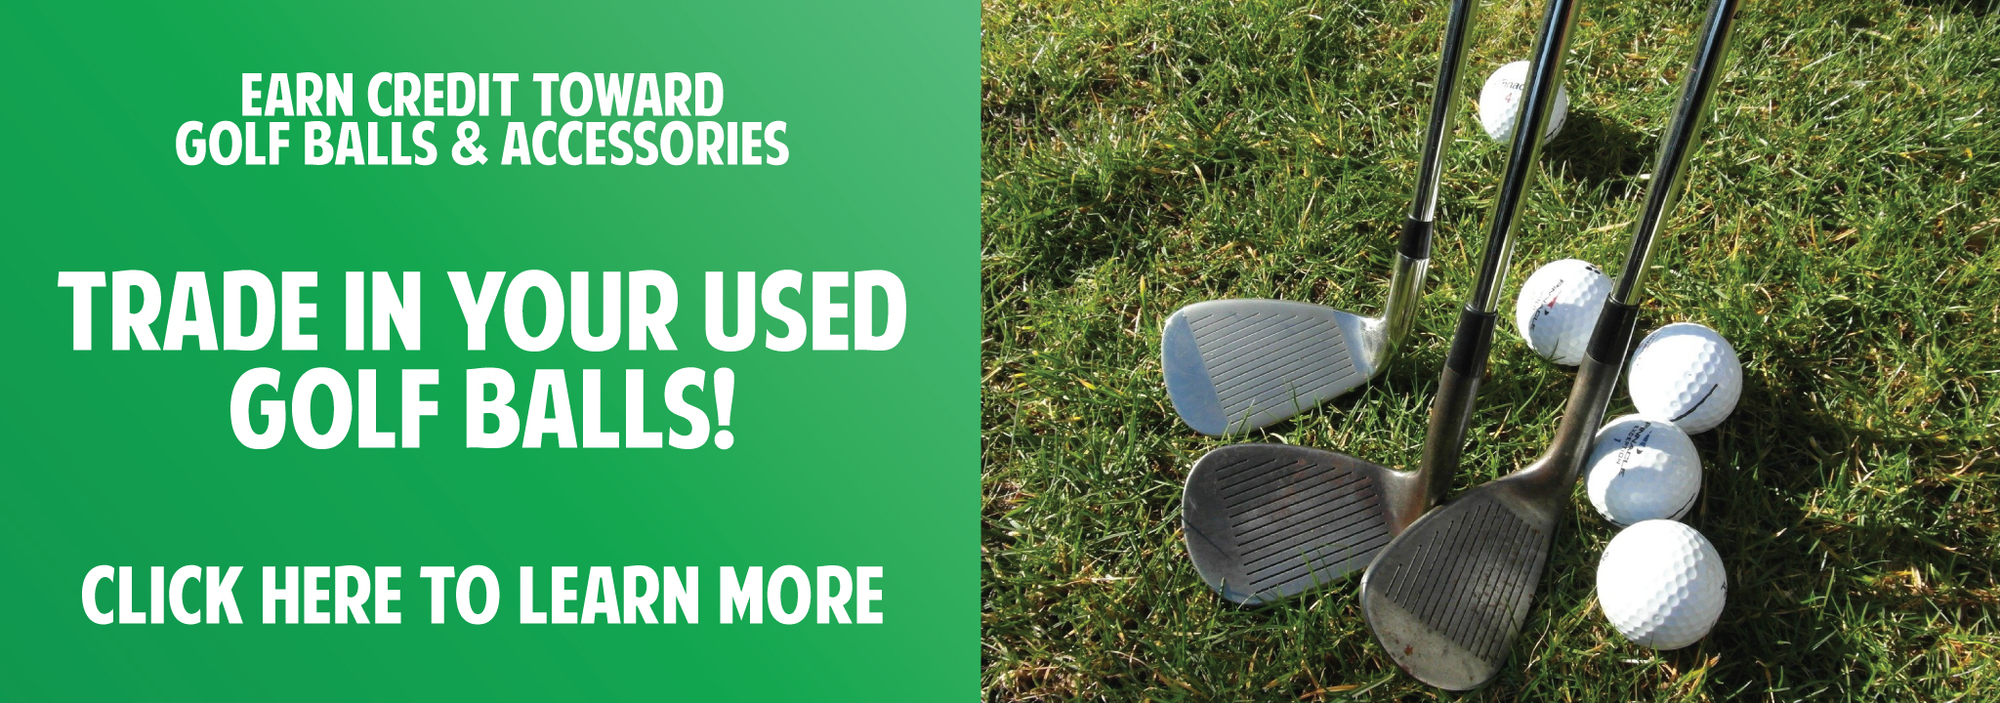 Trade in your used golf balls! Click here to learn more!